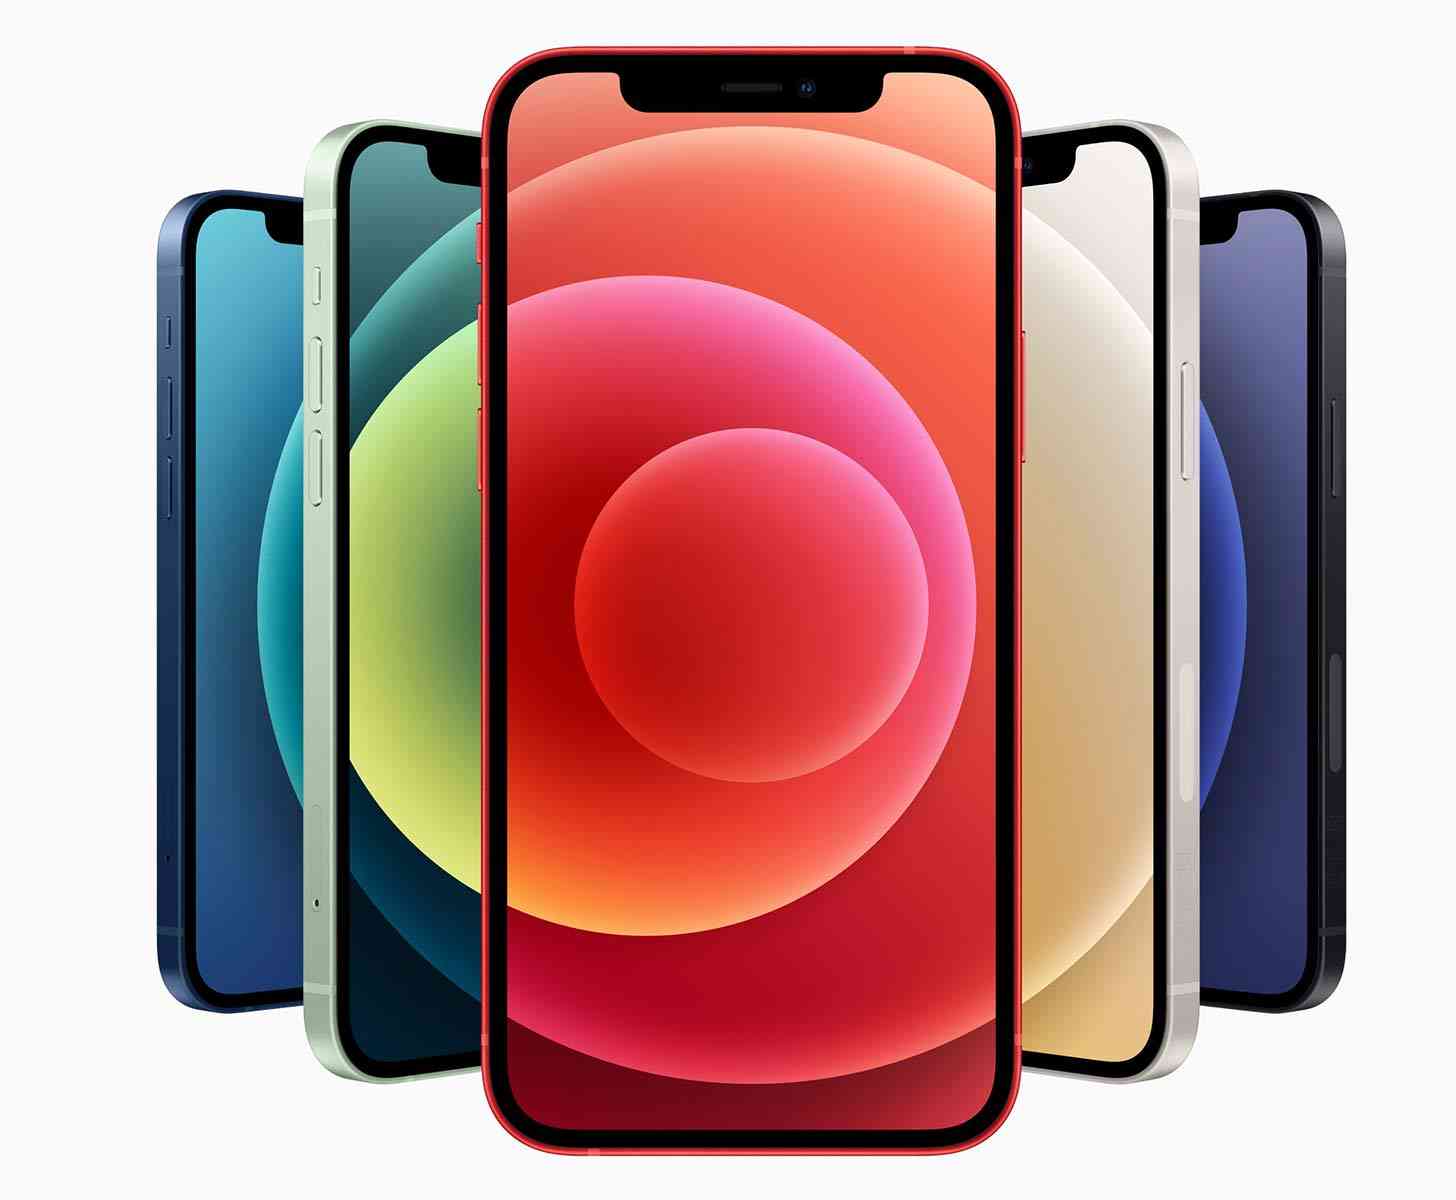 iphone 12 colors and storage